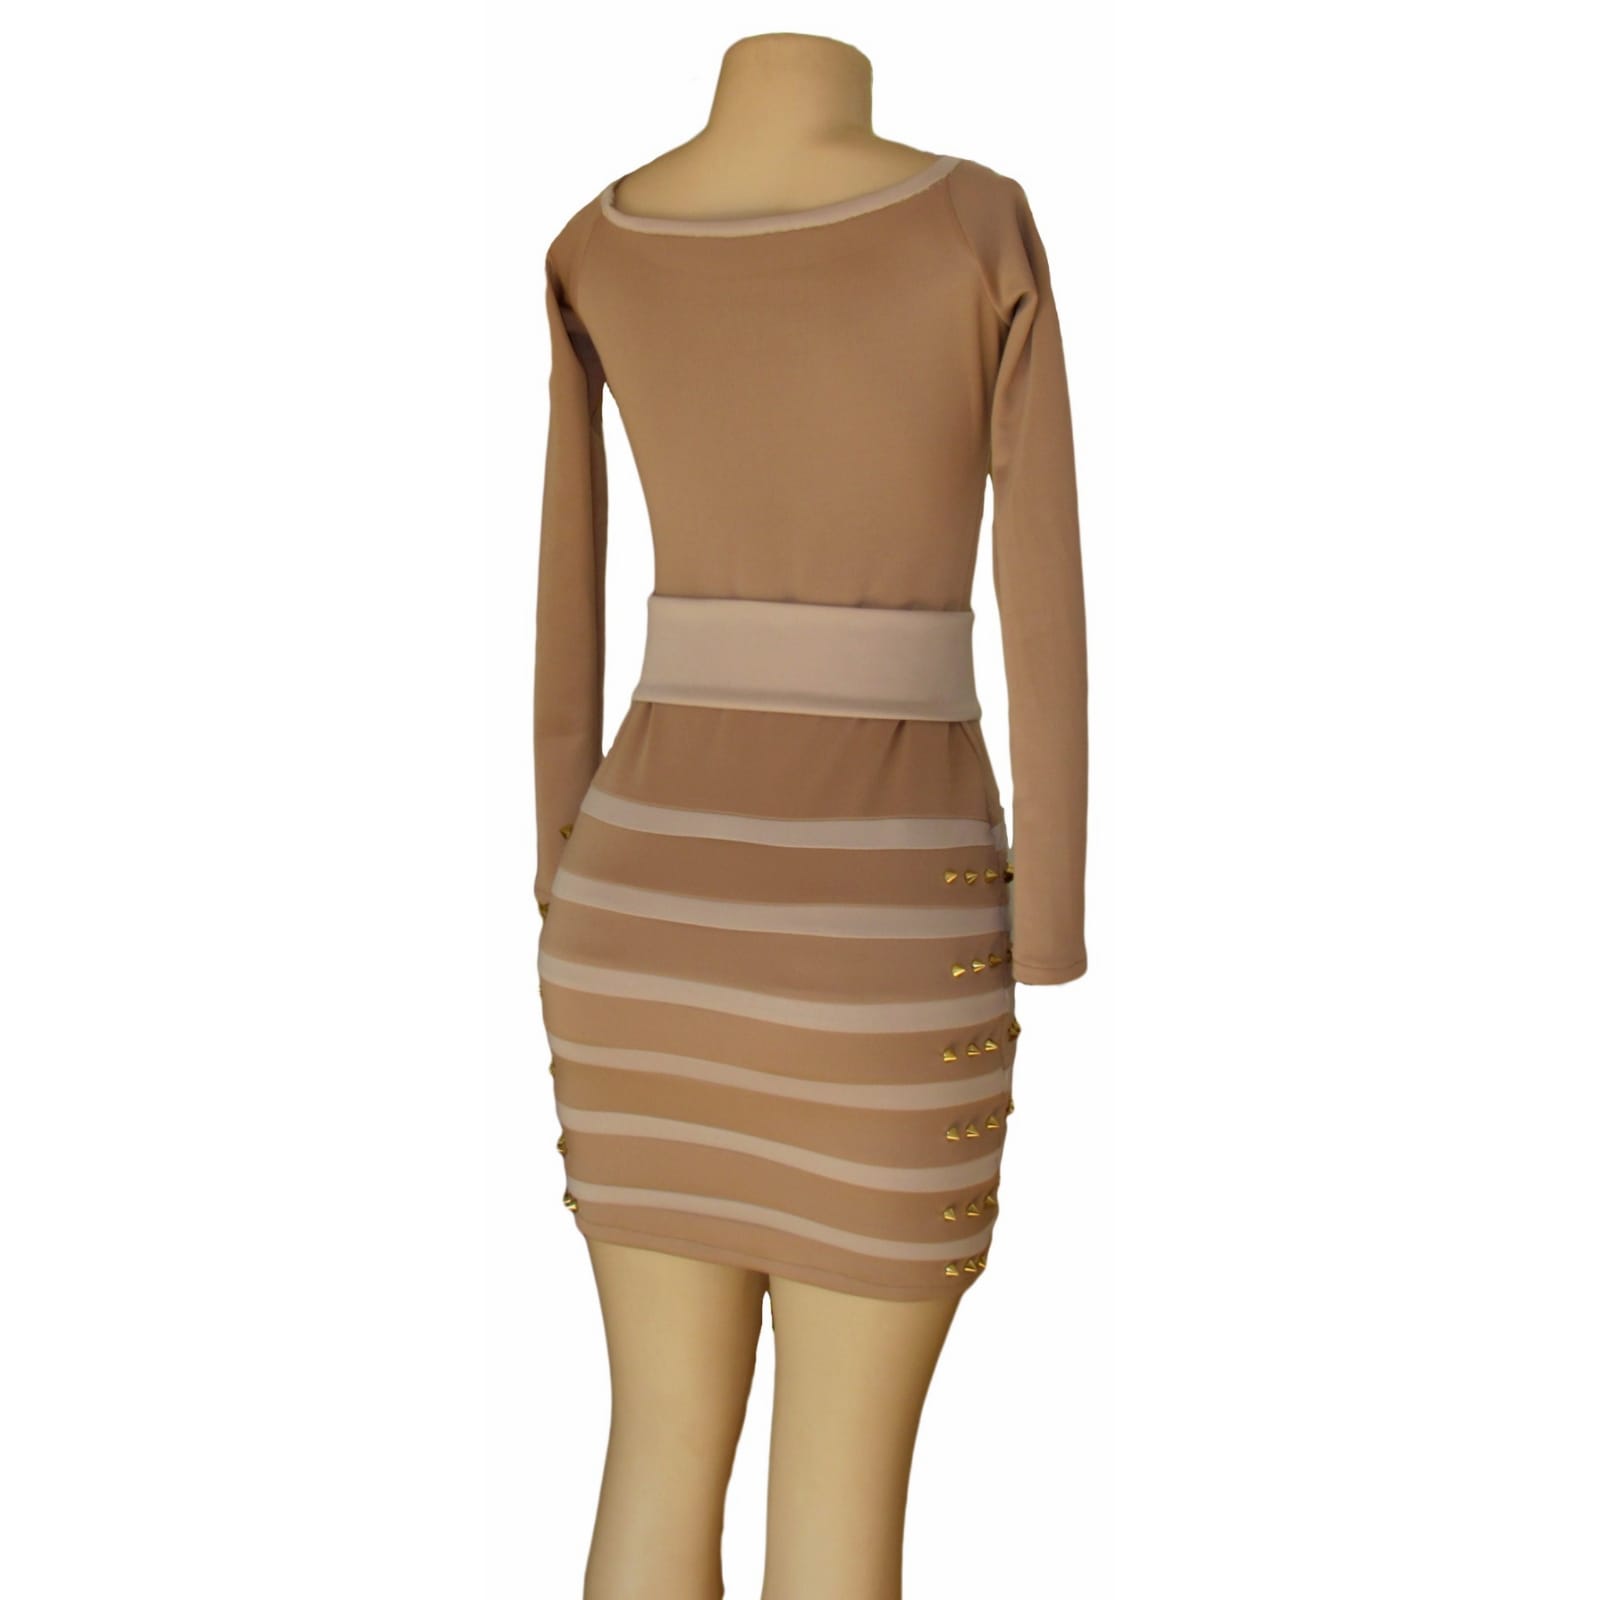 Nude and tan tight fitting short evening dress 3 nude and tan tight fitting short evening dress with a square neckline, long sleeves, a removable belt, detailed with gold spiked studs.